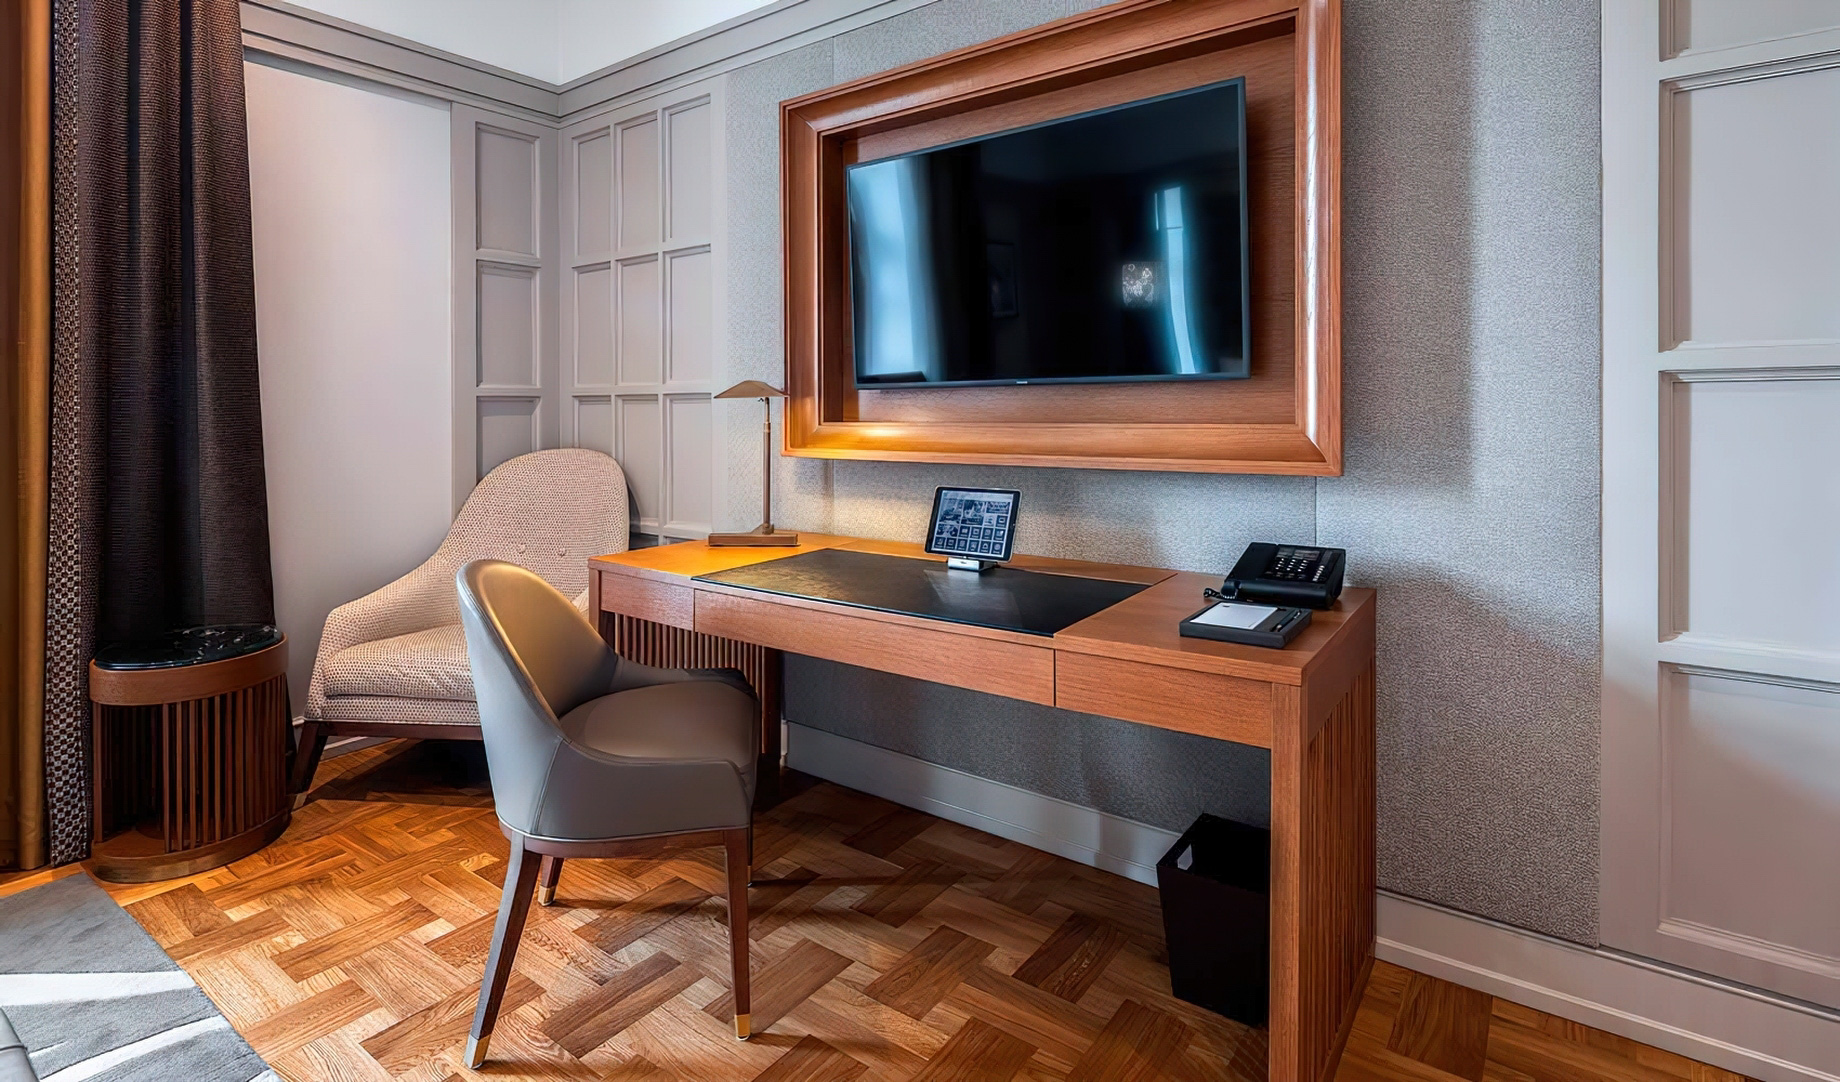 Metropol Hotel Moscow – Moscow, Russia – Executive Room Desk